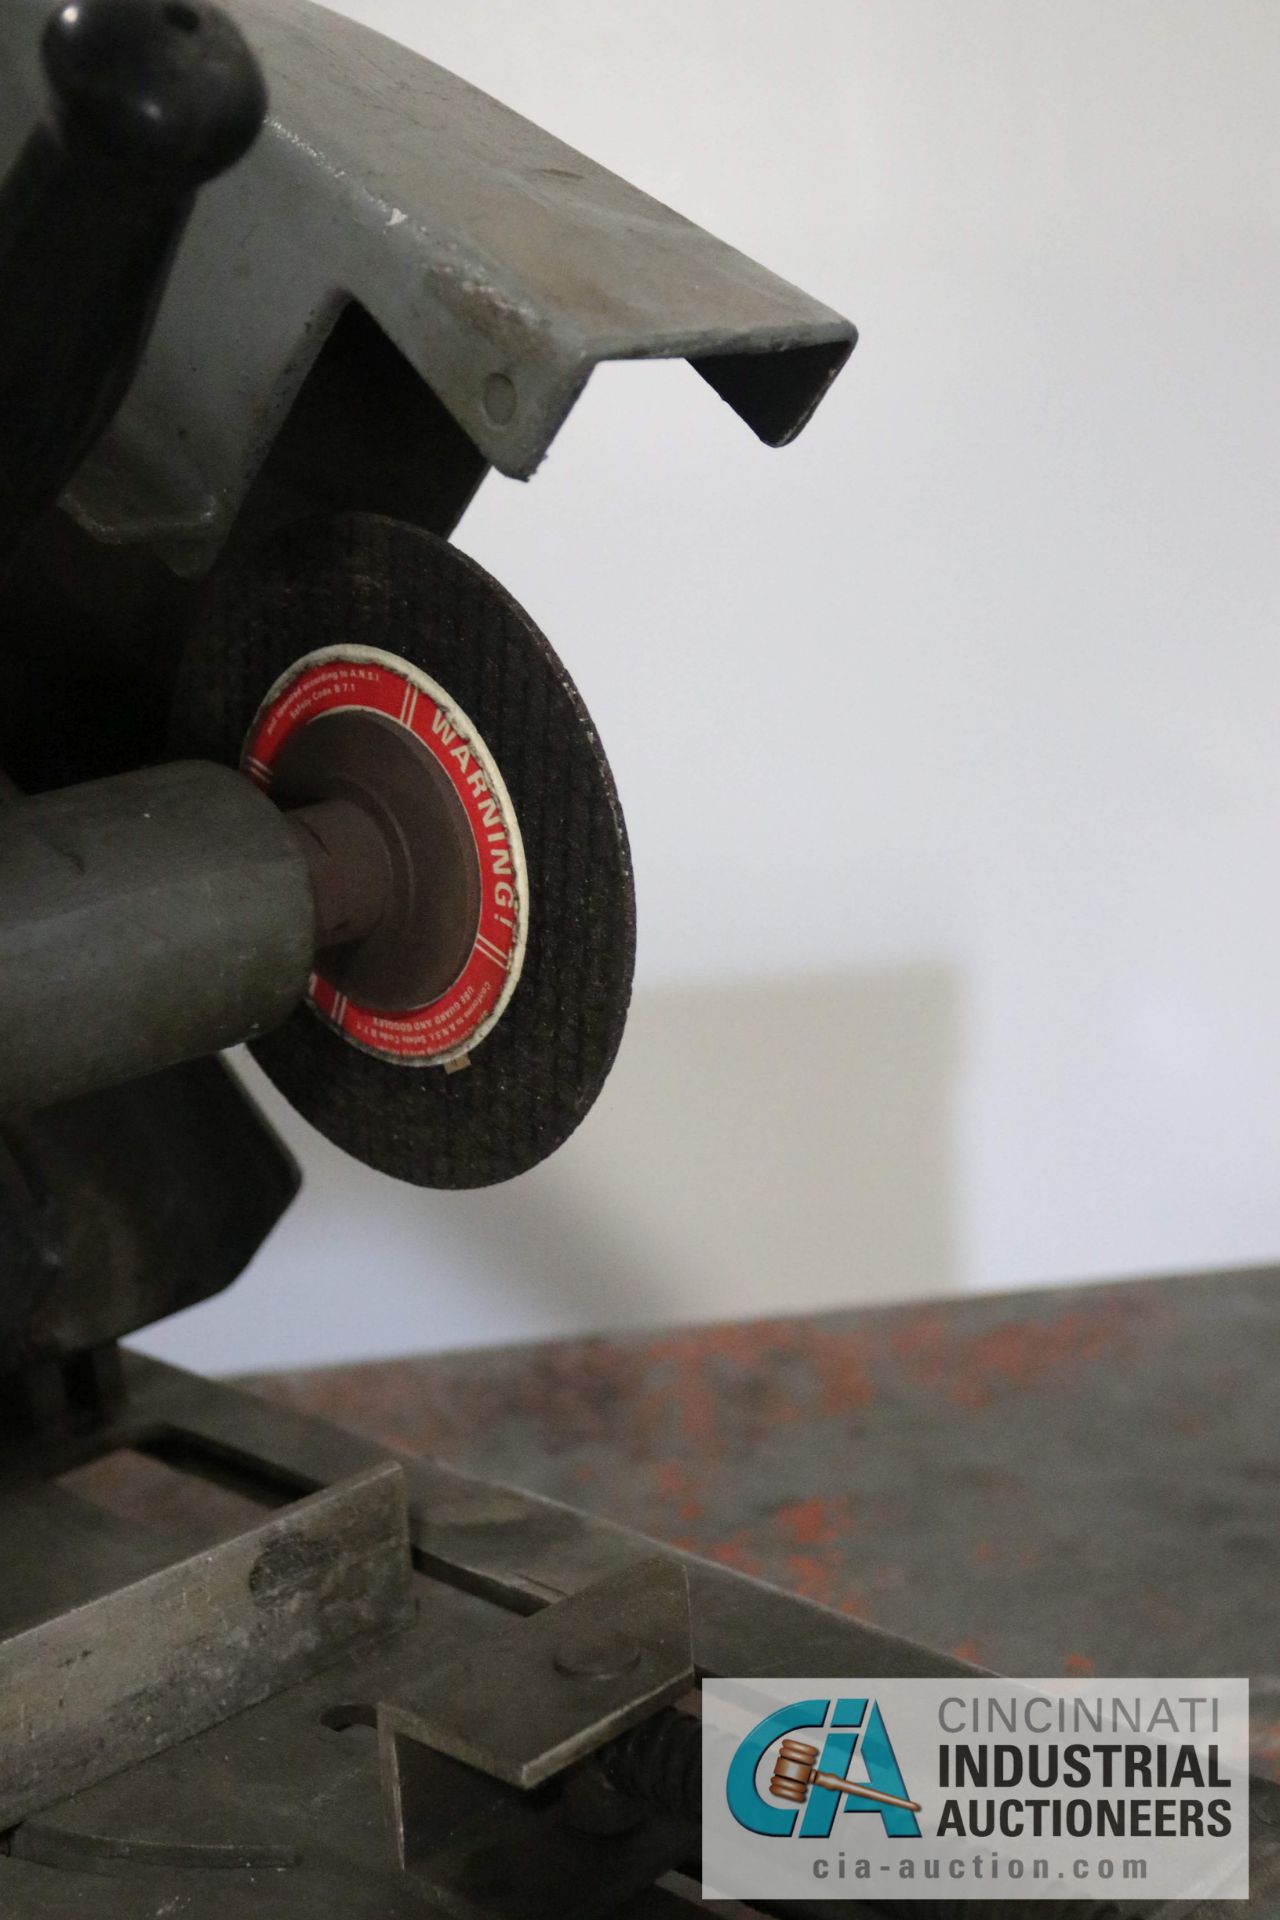 3 HP ROCKWELL MODEL 8 ABRASIVE CUTOFF SAW; S/N 438-02-3140808, SINGLE PHASE - Located in Holland, - Image 4 of 5